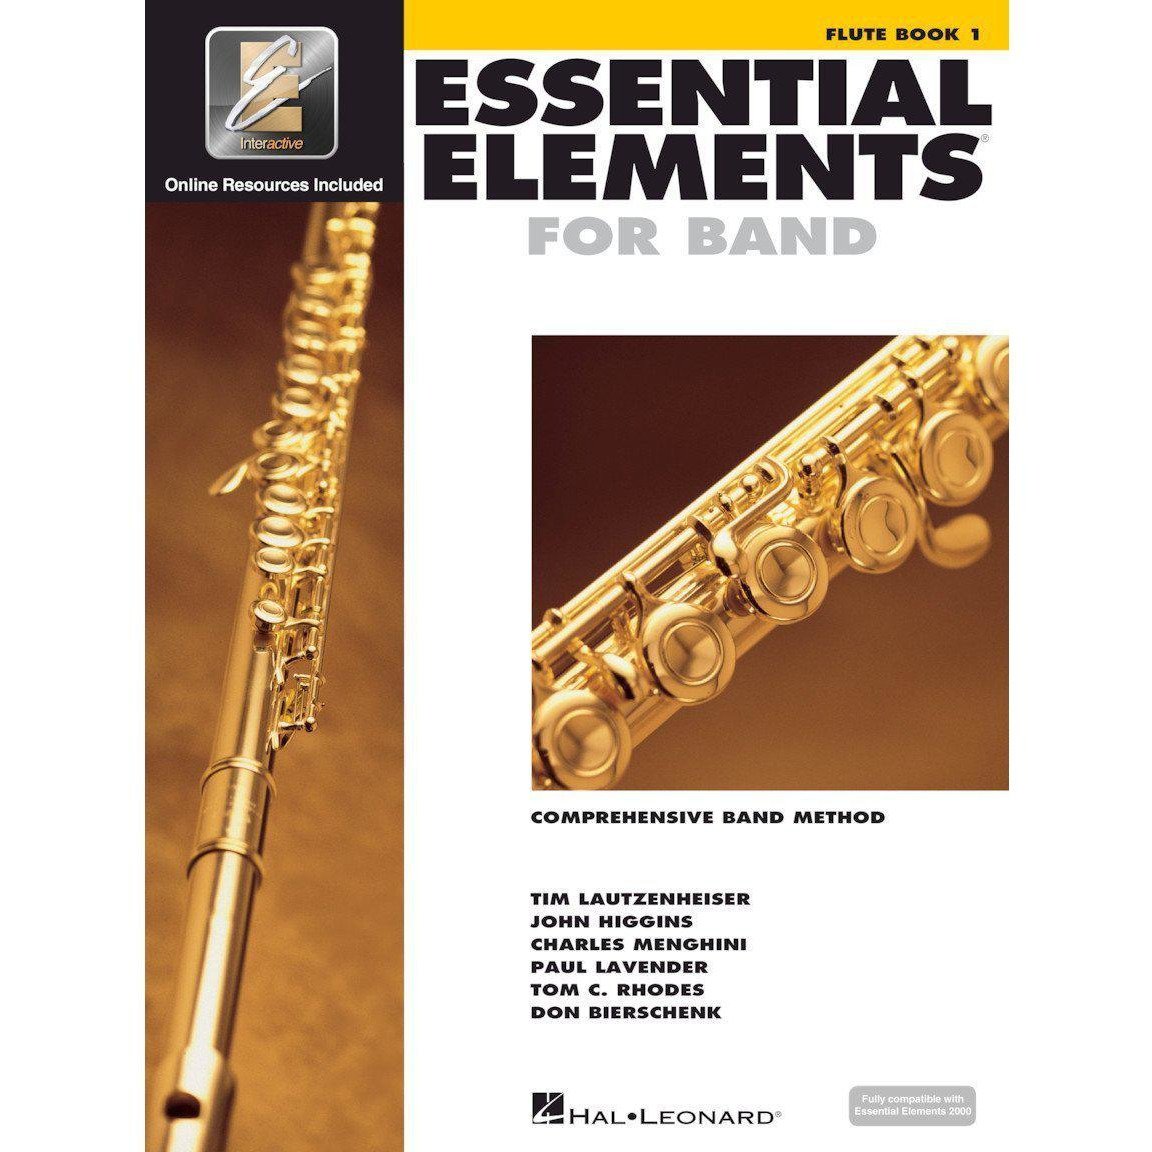 Essential Elements for Band Book 1-Flute-Andy's Music